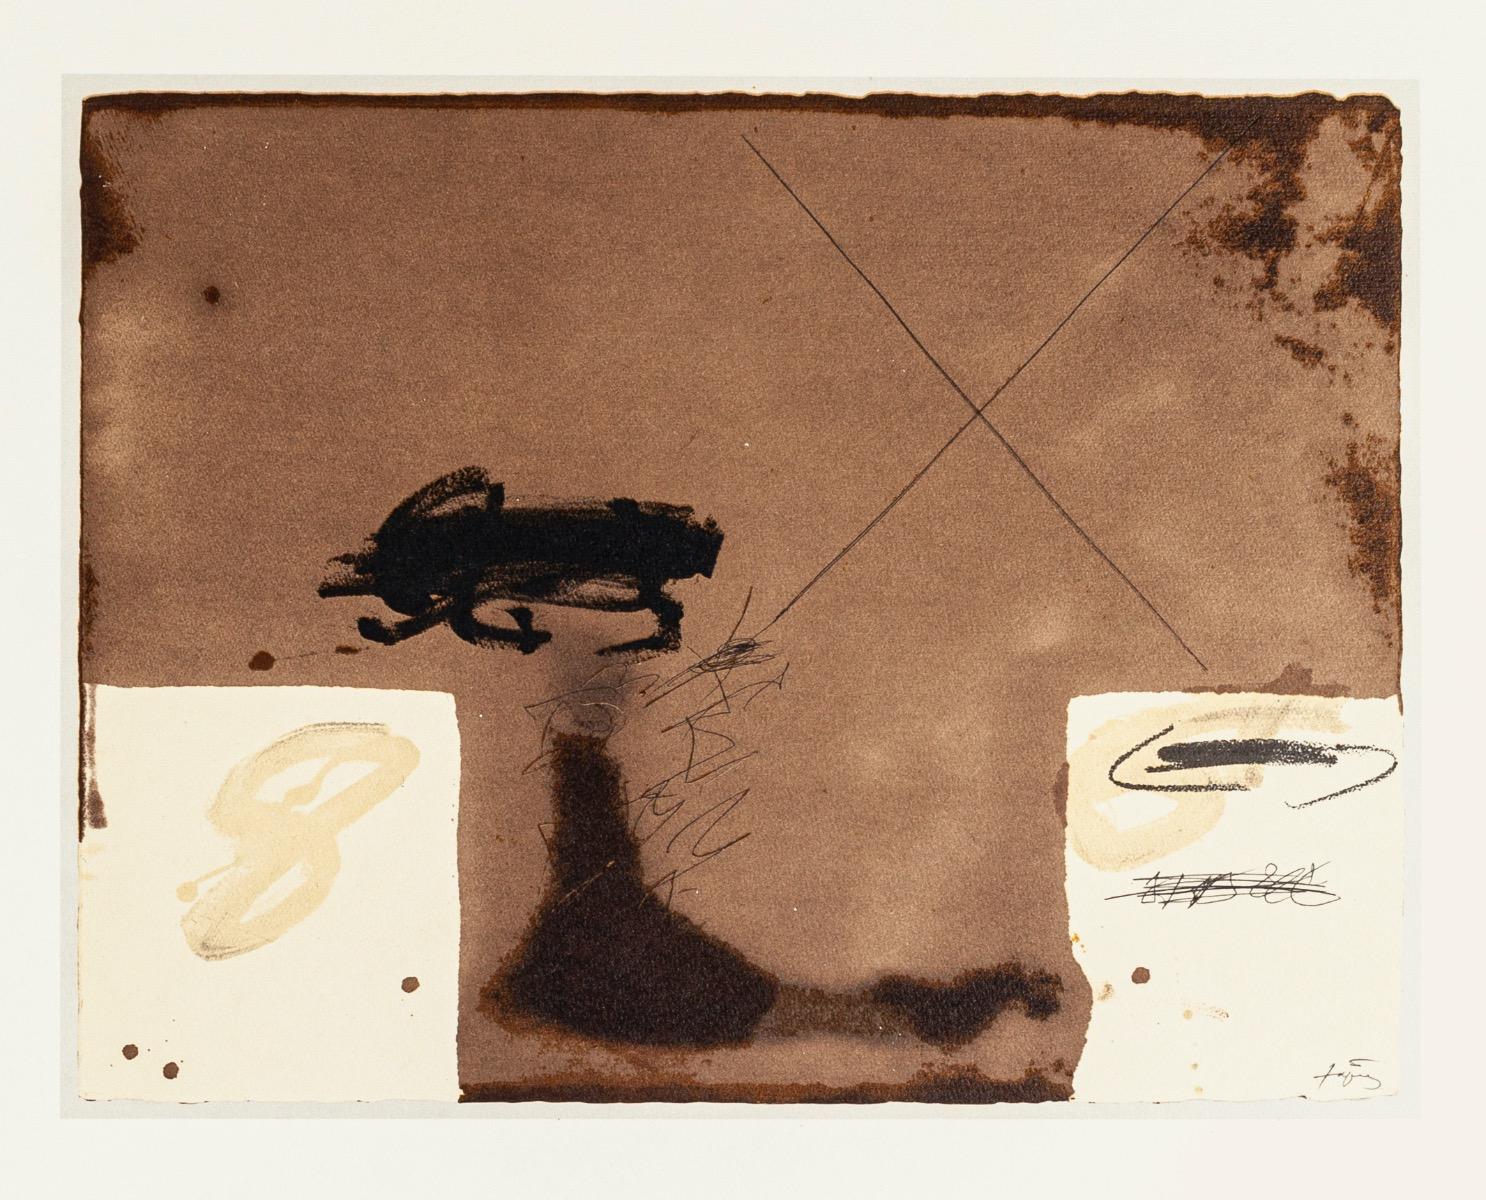 Antoni Tàpies (after) Abstract Print - Two White Rectangles - Vintage Offset Print after Antoni Tàpies - 1982